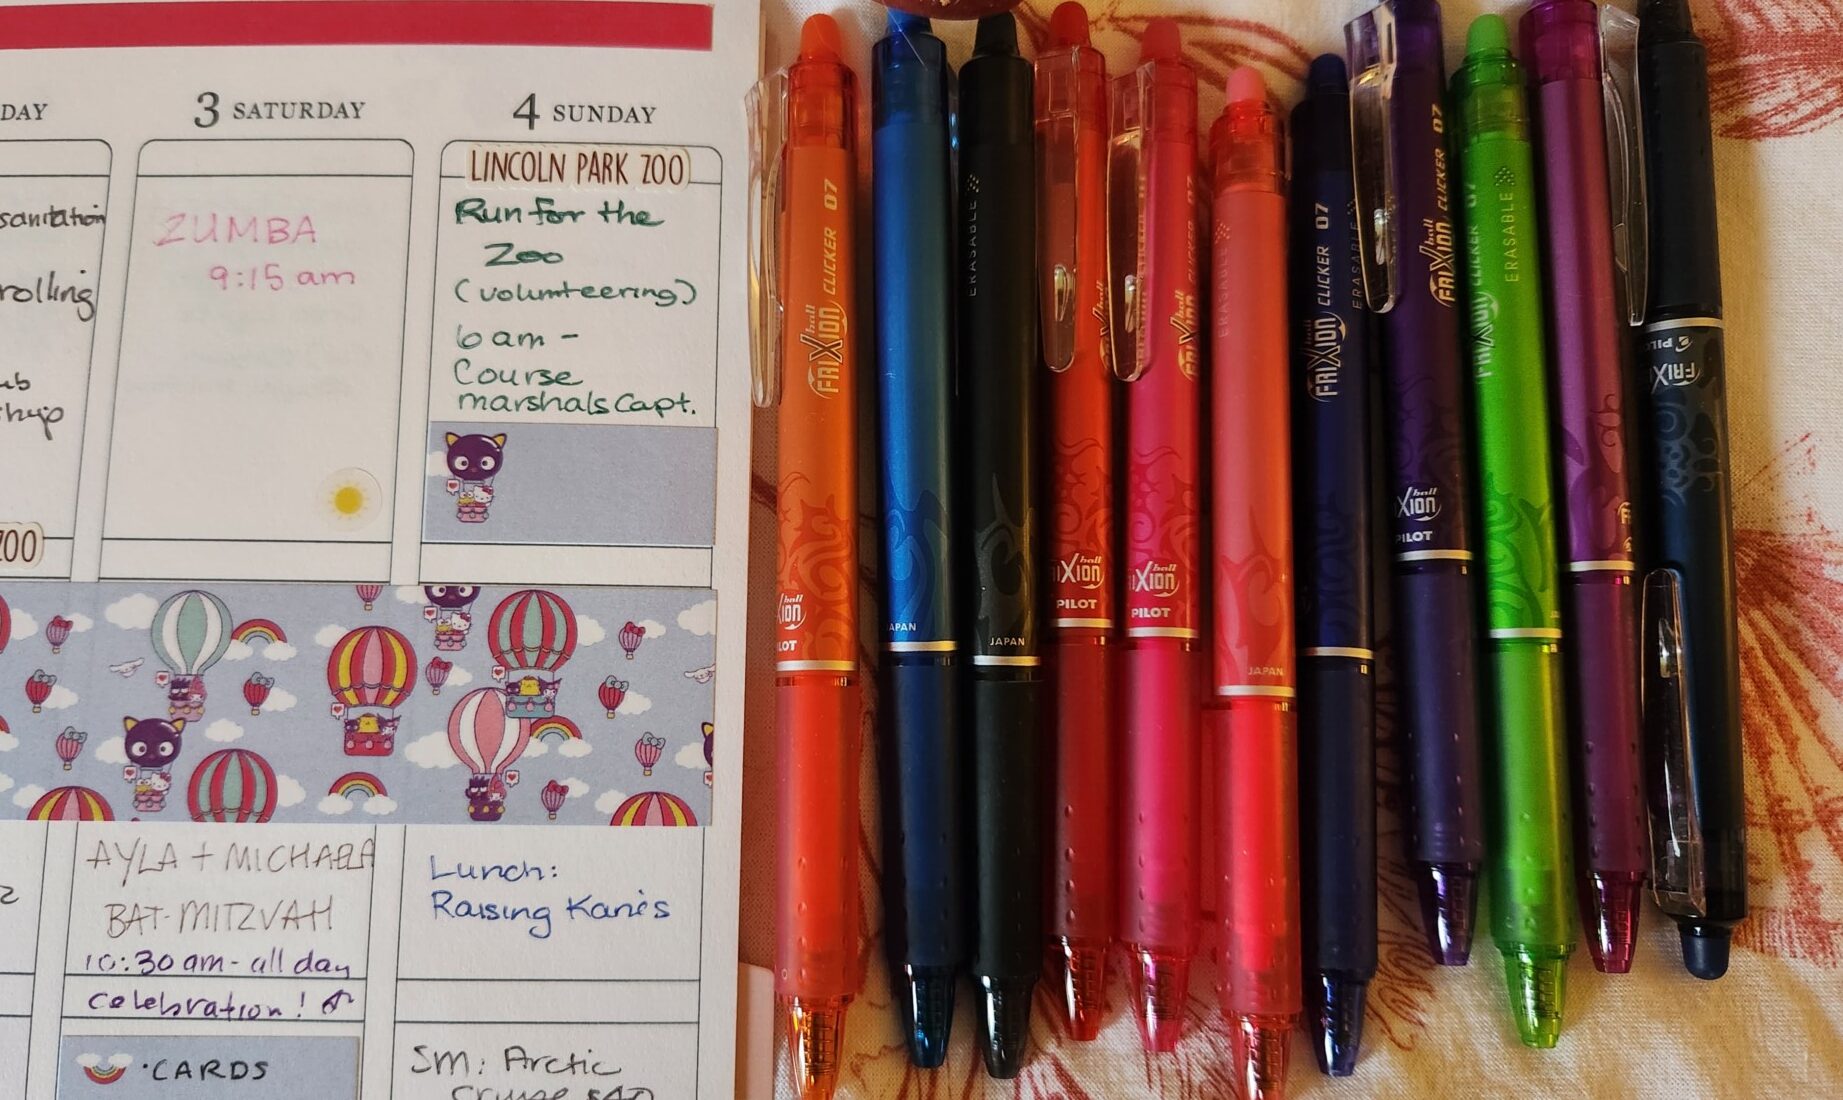 Frixion pens in multiple colors next to planner